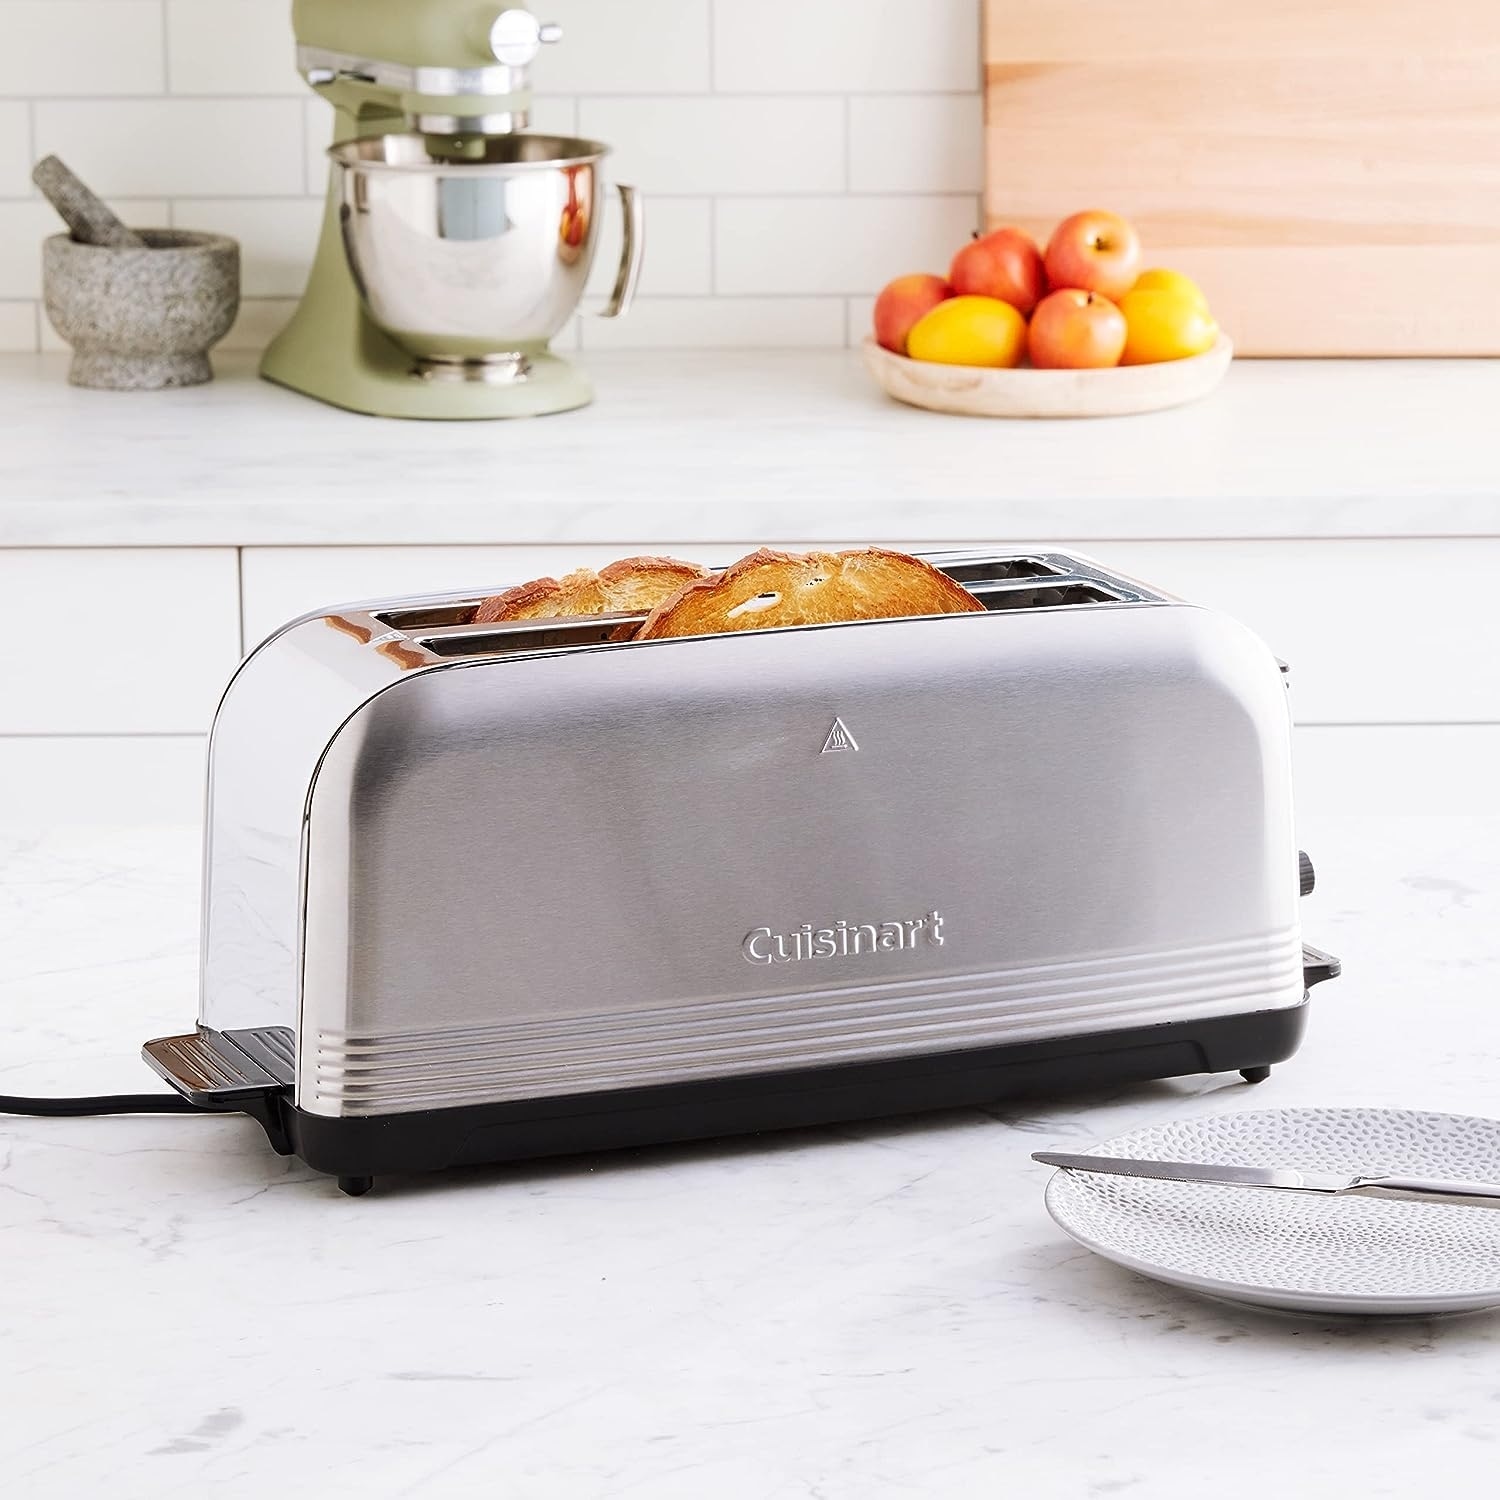 https://ak1.ostkcdn.com/images/products/is/images/direct/1837887a31bafb43d259c22856cfc13911d13cb7/Cuisinart-CPT-2500-Long-Slot-Toaster%2C-Stainless-Steel%2C-Silver%2C-2-slice-long-slot.jpg